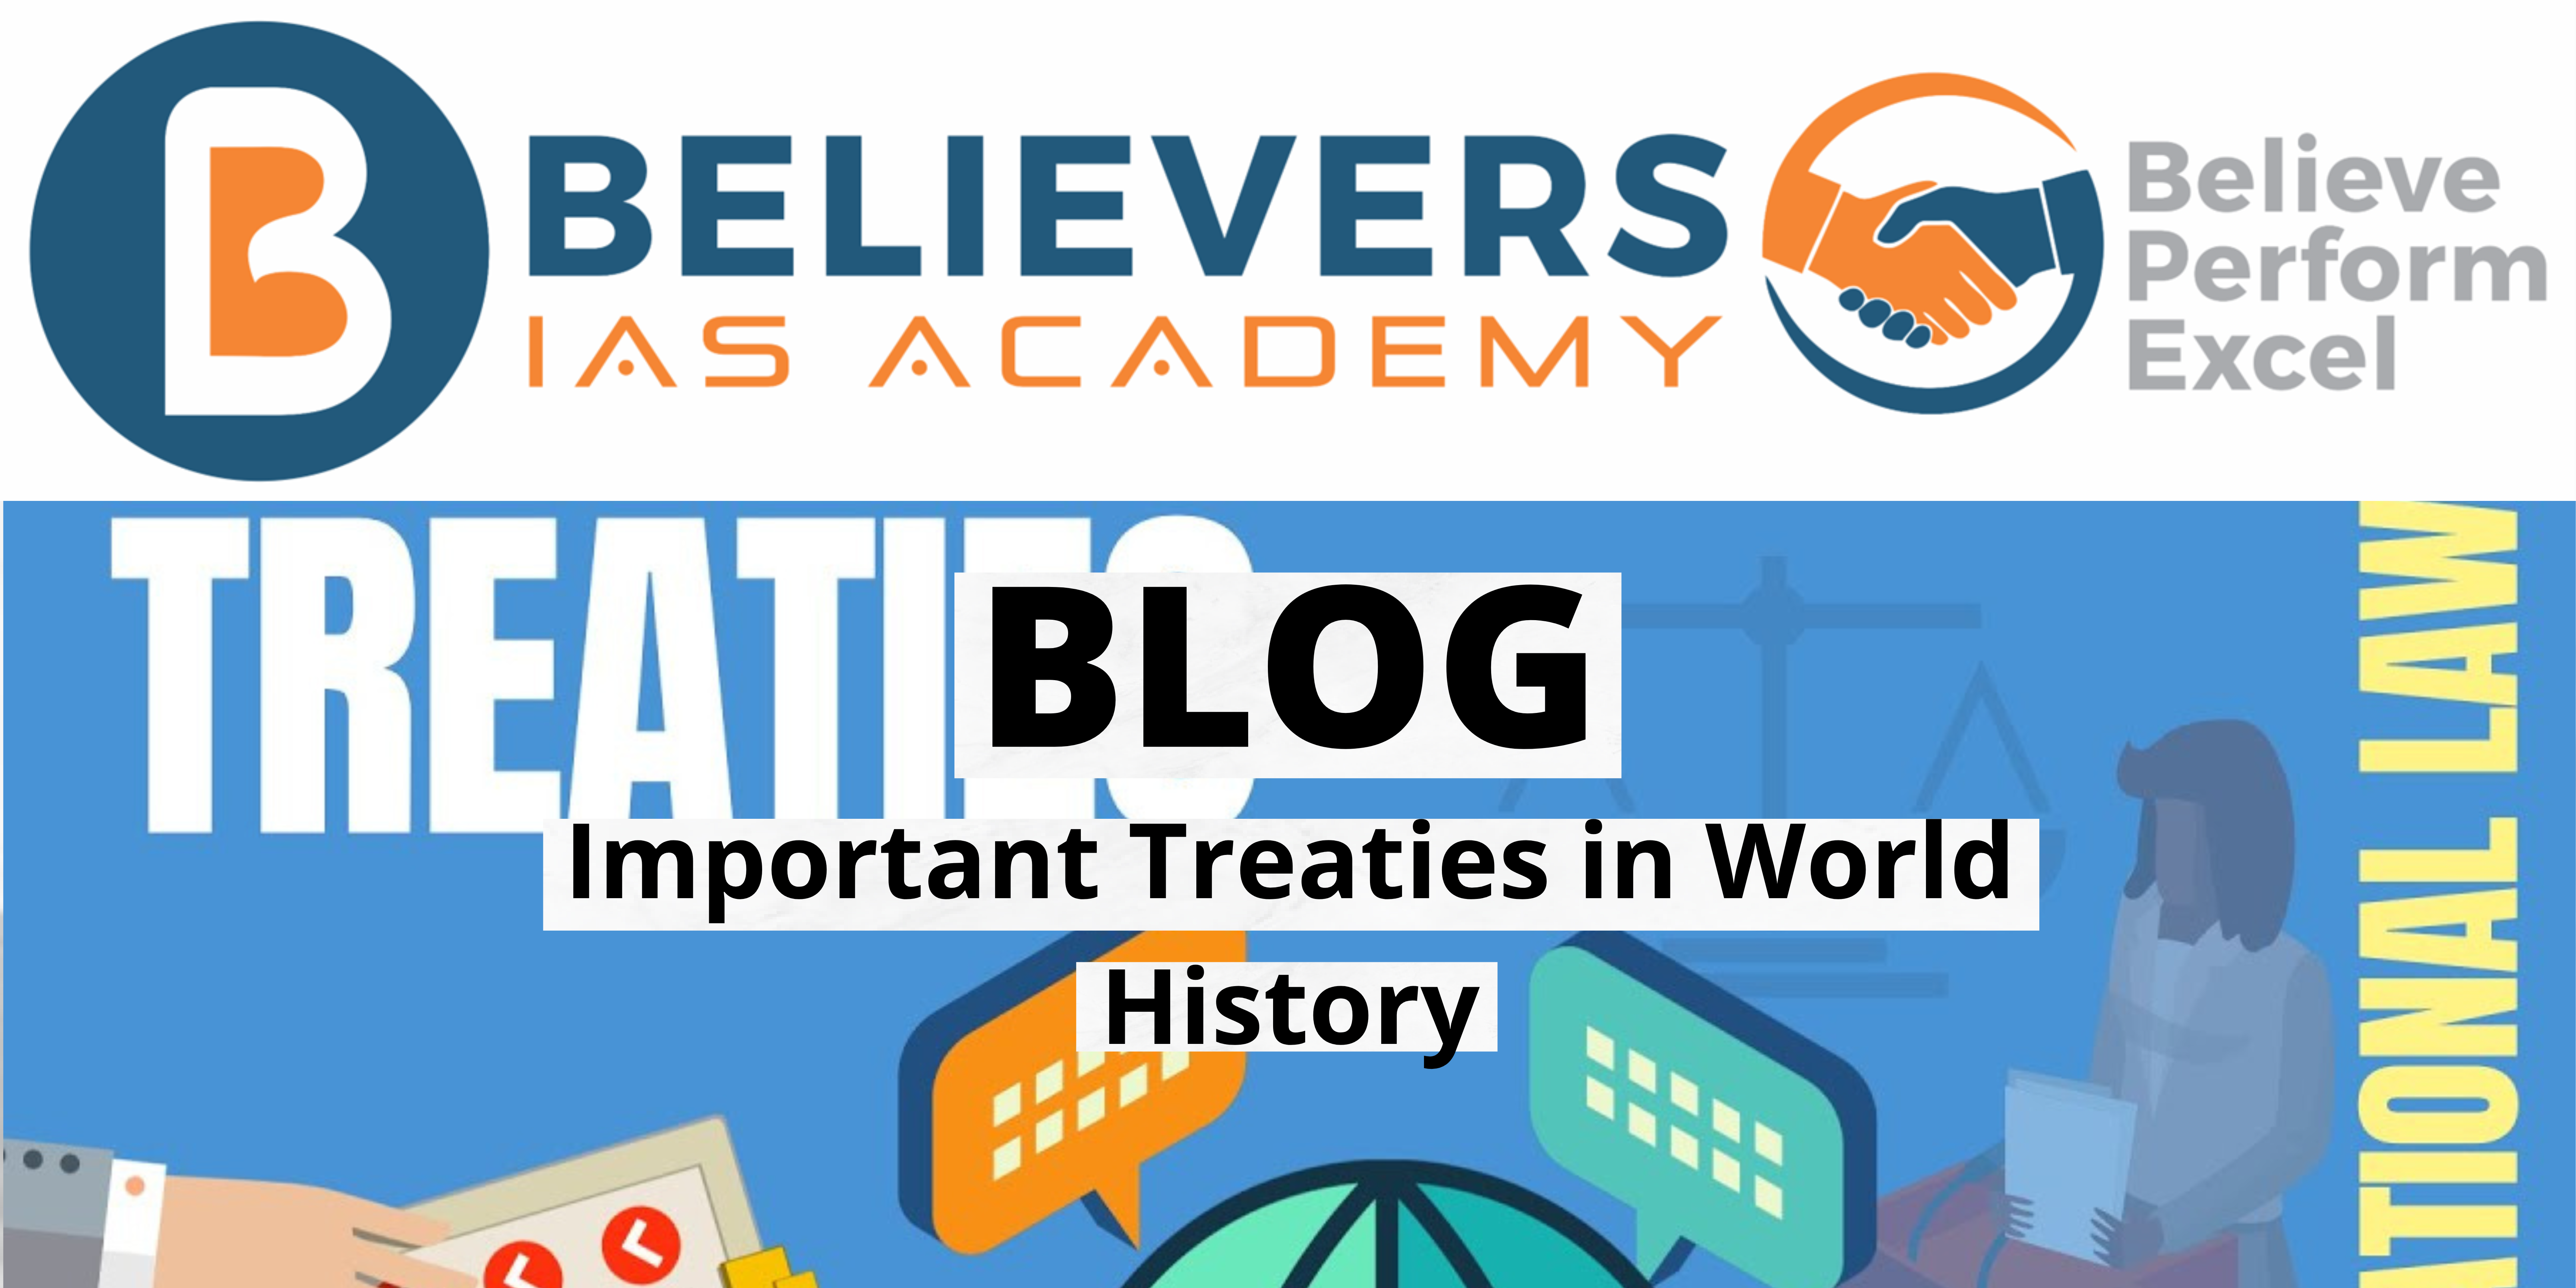 Important Treaties in World History